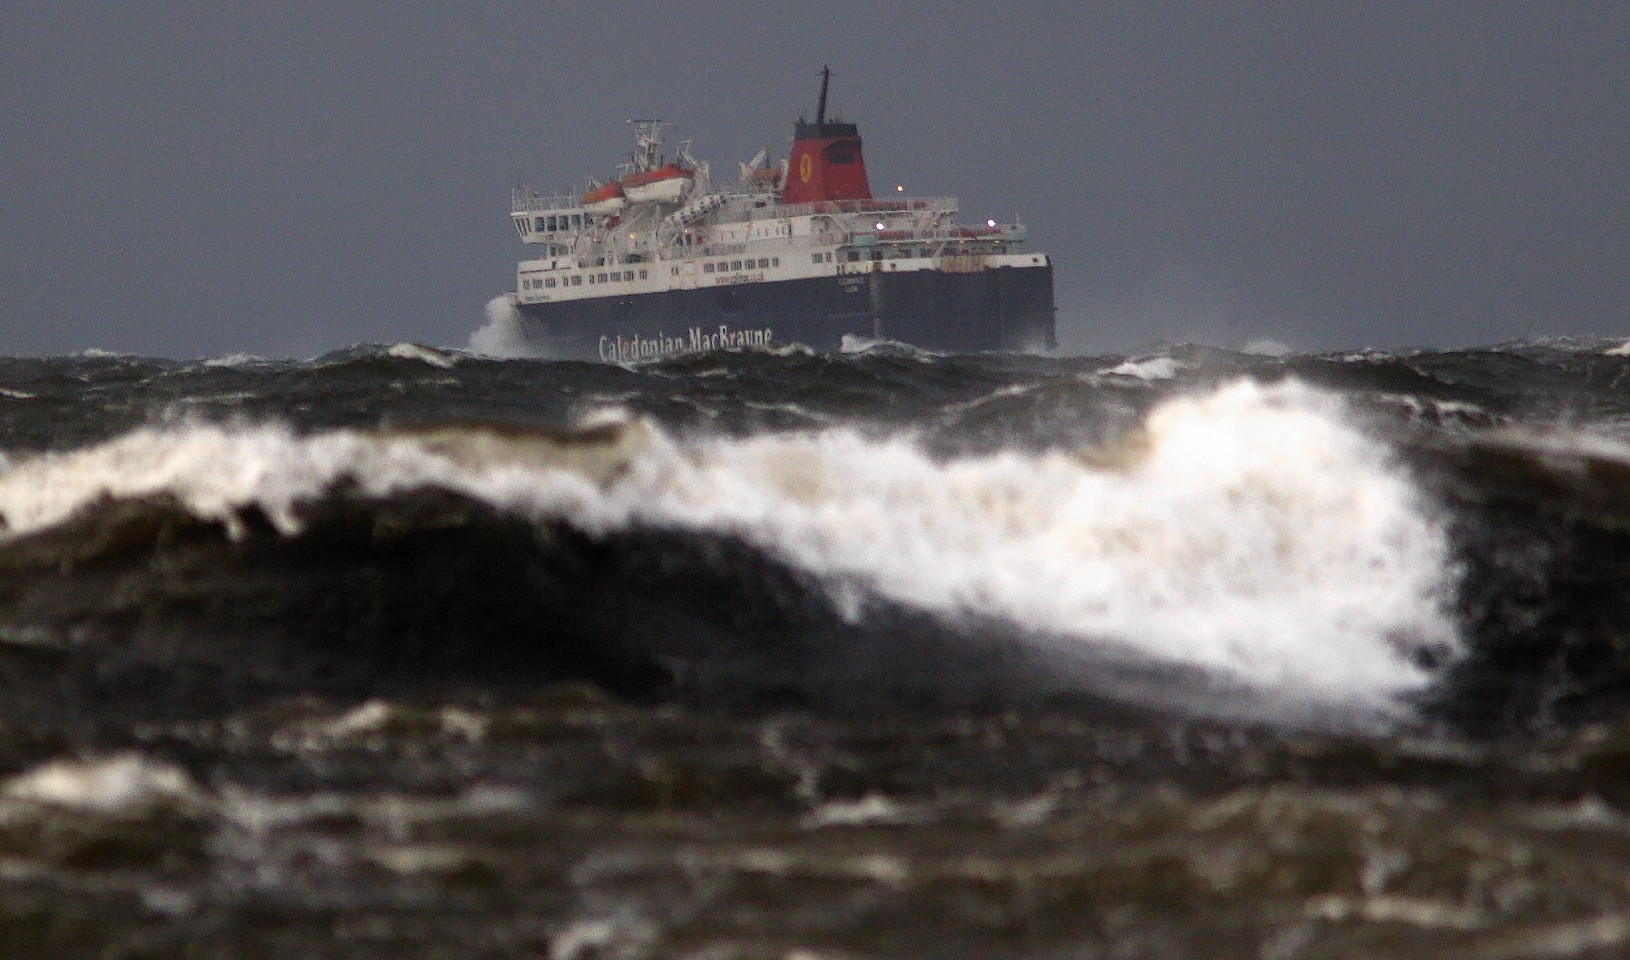 Disruption is expected on ferry services during Storm Abigail